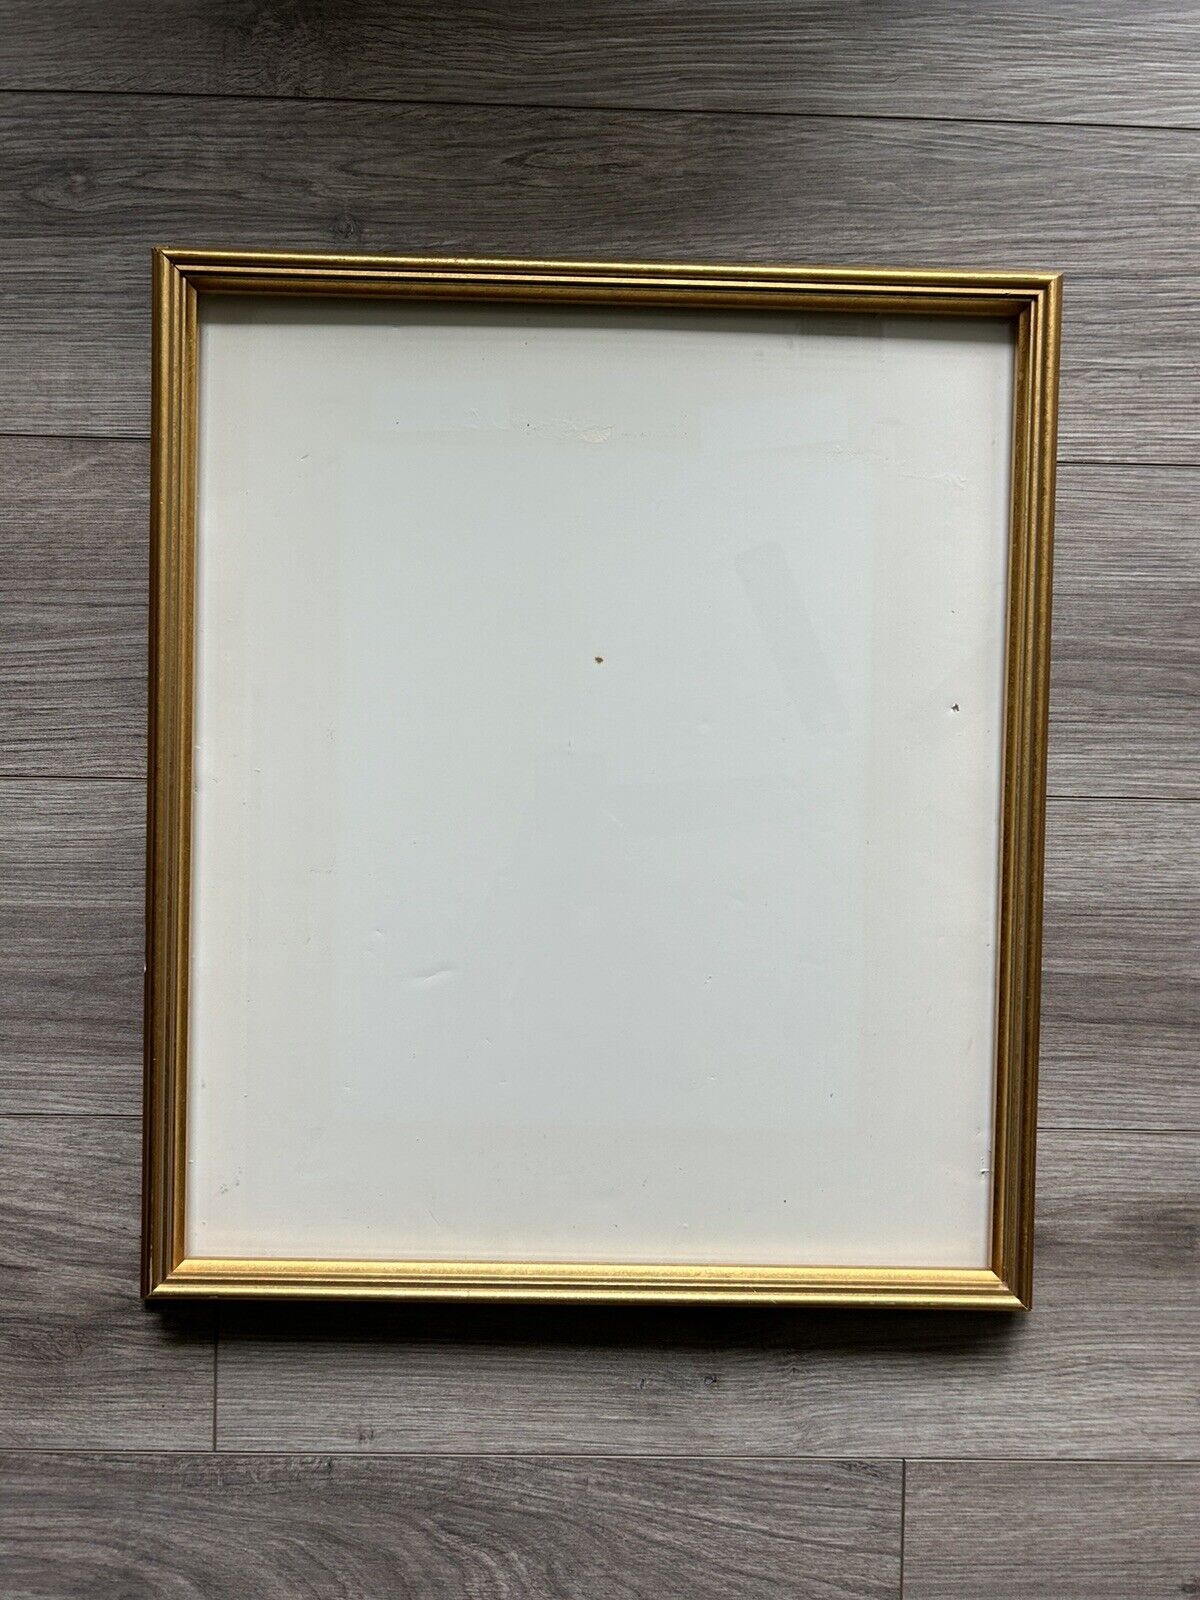 Vintage Gold Gilt Wood Picture Frame With 19”x16” Opening With Glass